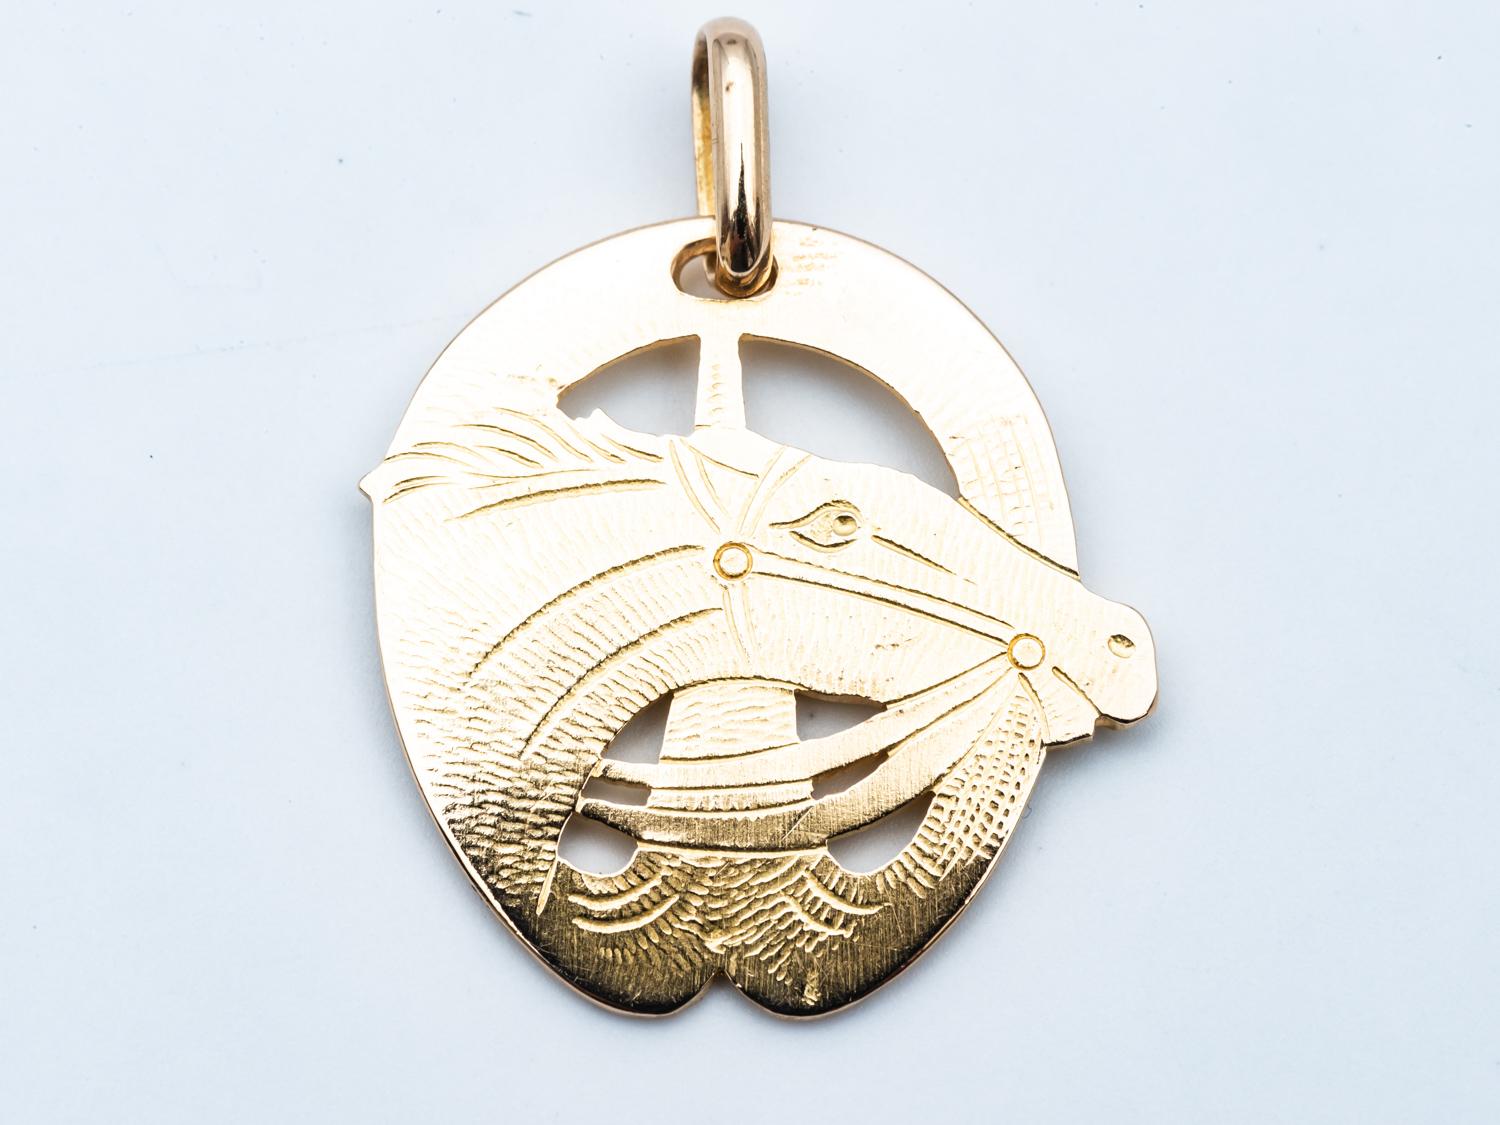 A magnificent pendant in 18-carat yellow gold, a true lucky charm that will delight all equestrian enthusiasts. This exquisite pendant depicts a majestic horse, surrounded by its horseshoe, symbolizing good luck and protection.

Crafted by renowned